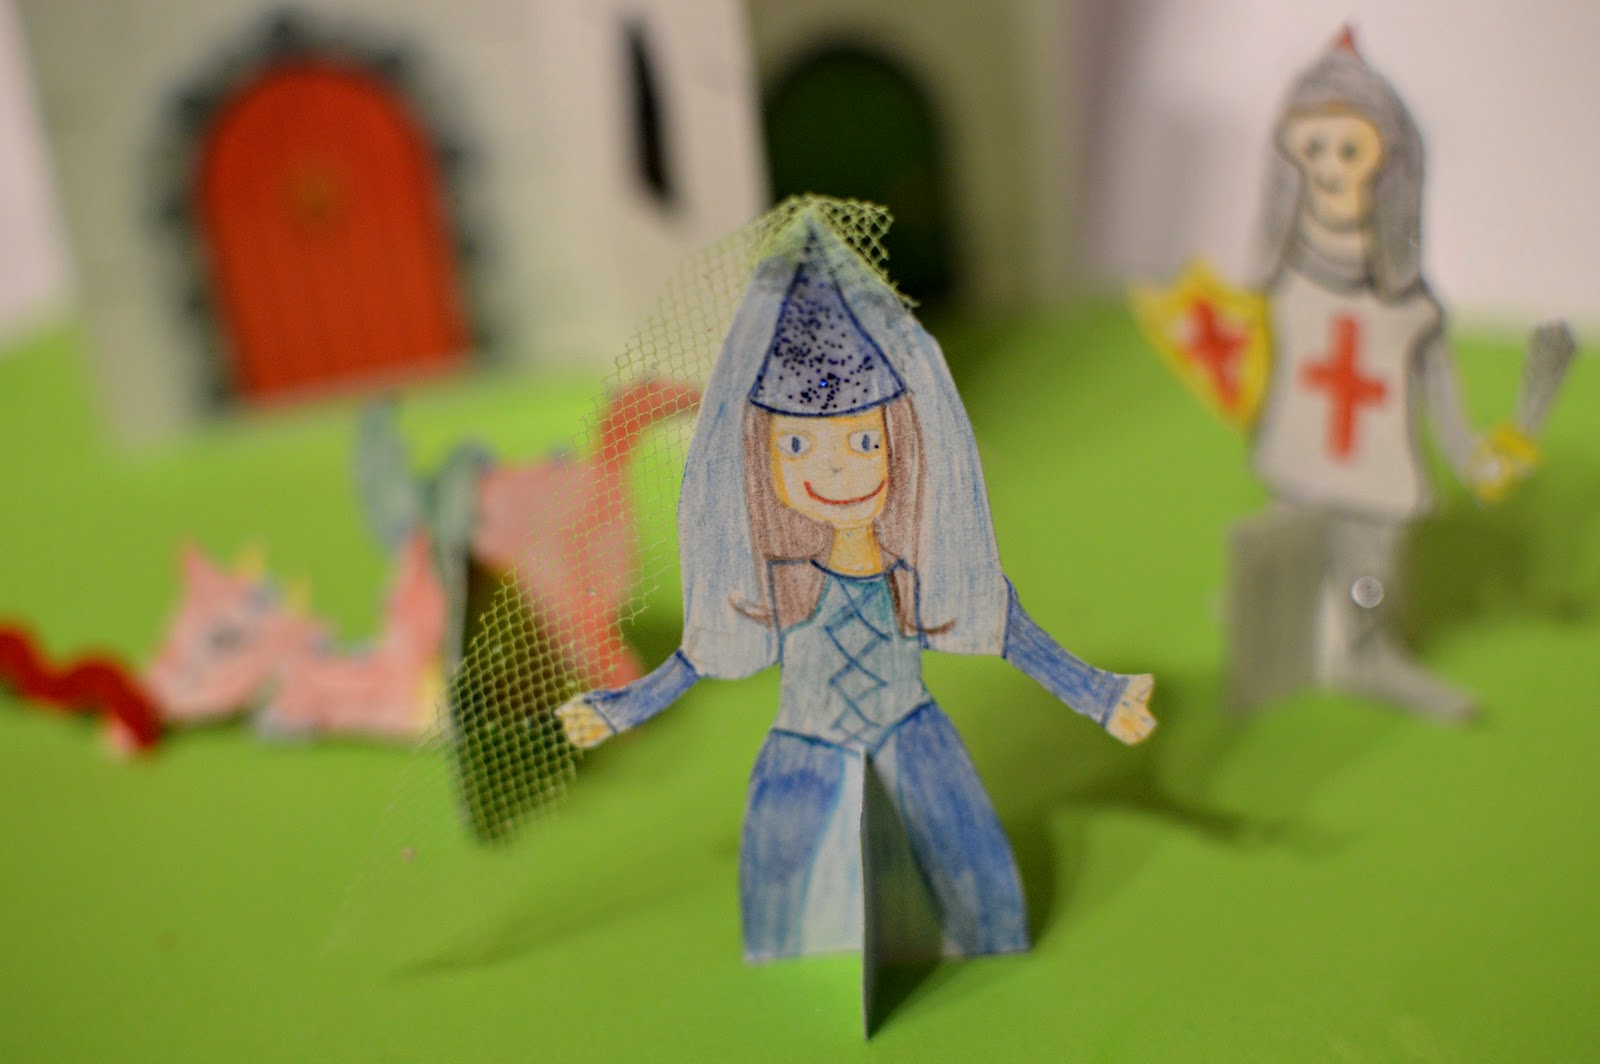 , Craft:  Make a Card Castle Play Scene with Dragon, Knight and Princess